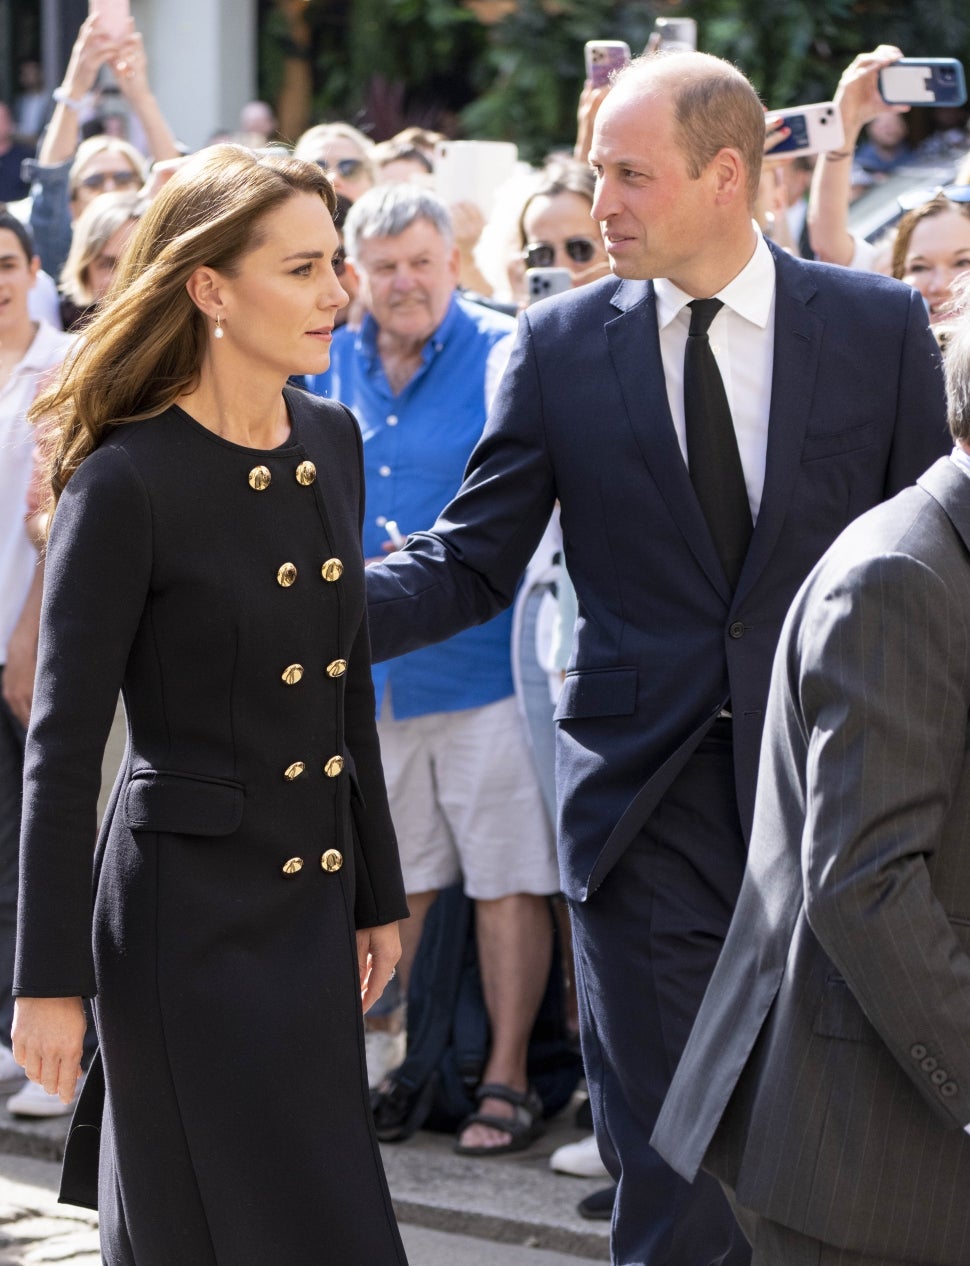 Prince William and Kate Middleton step out for first engagement since queen's funeral. 